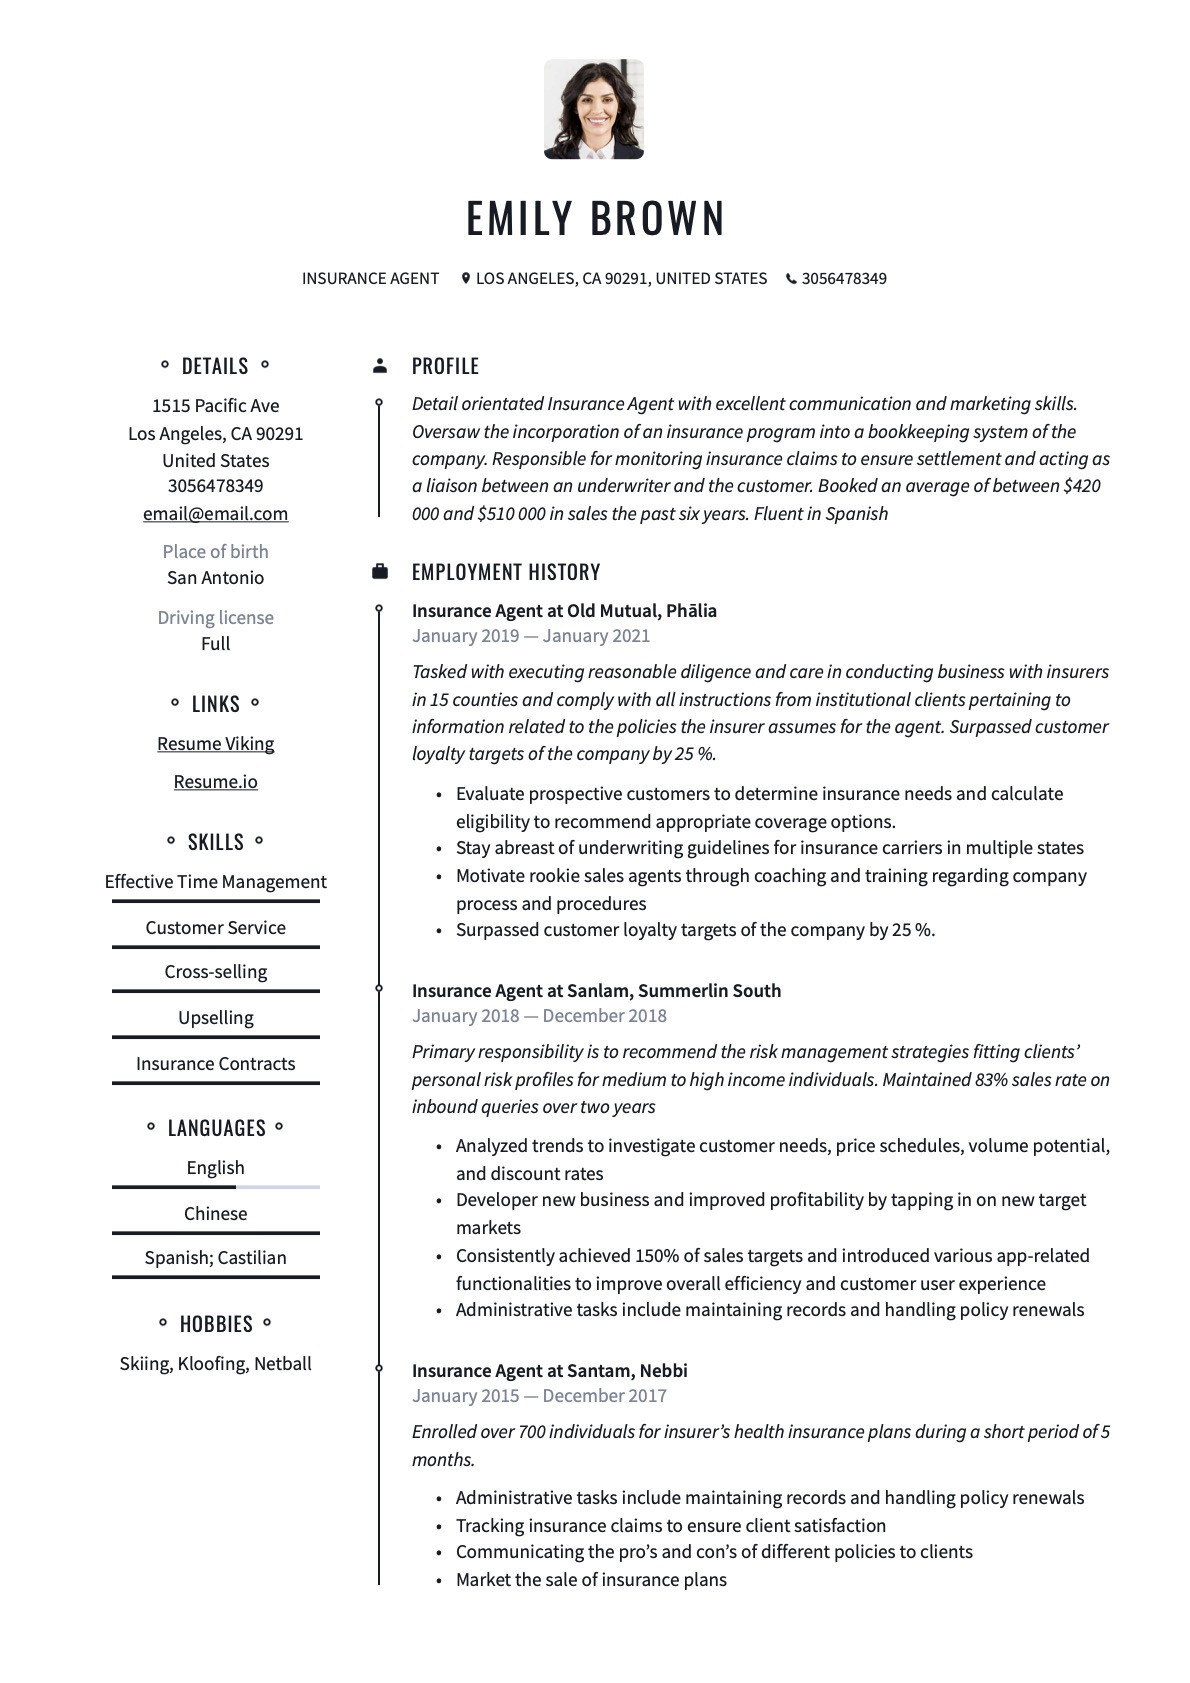 Sample Resume for Property and Casualty Insurance Agent Insurance Agent Resume & Writing Guide  20 Templates